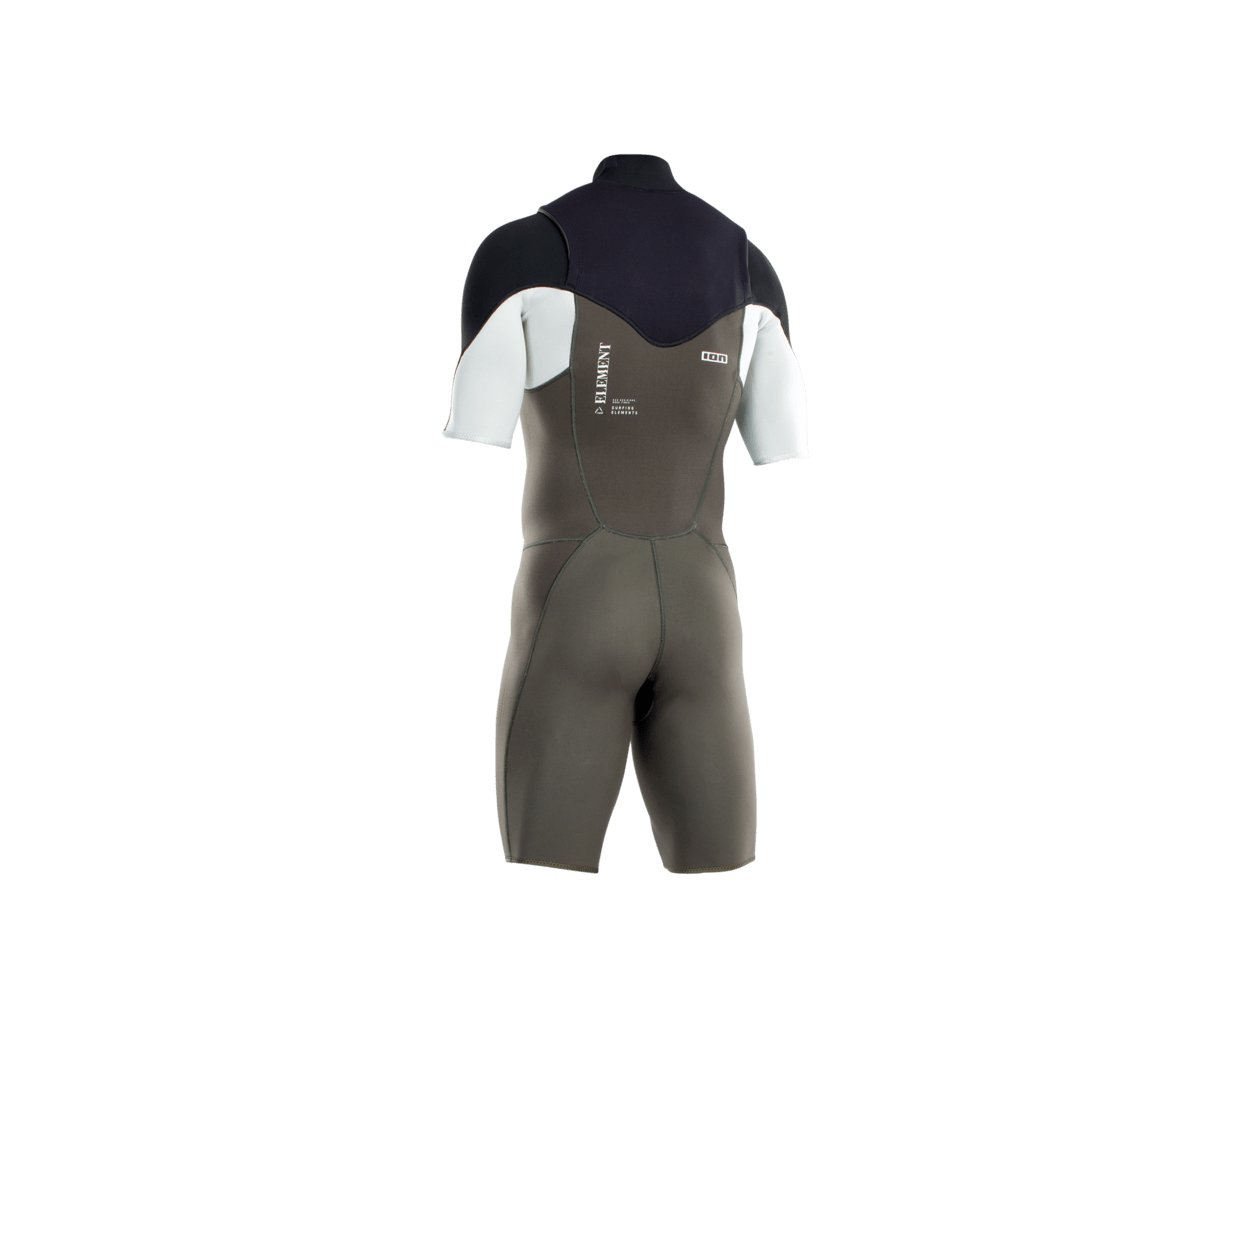 ION Men Wetsuit Element 2/2 Shorty Shortsleeve Front Zip 2022 - Worthing Watersports - 9008415951208 - Wetsuits - ION Water